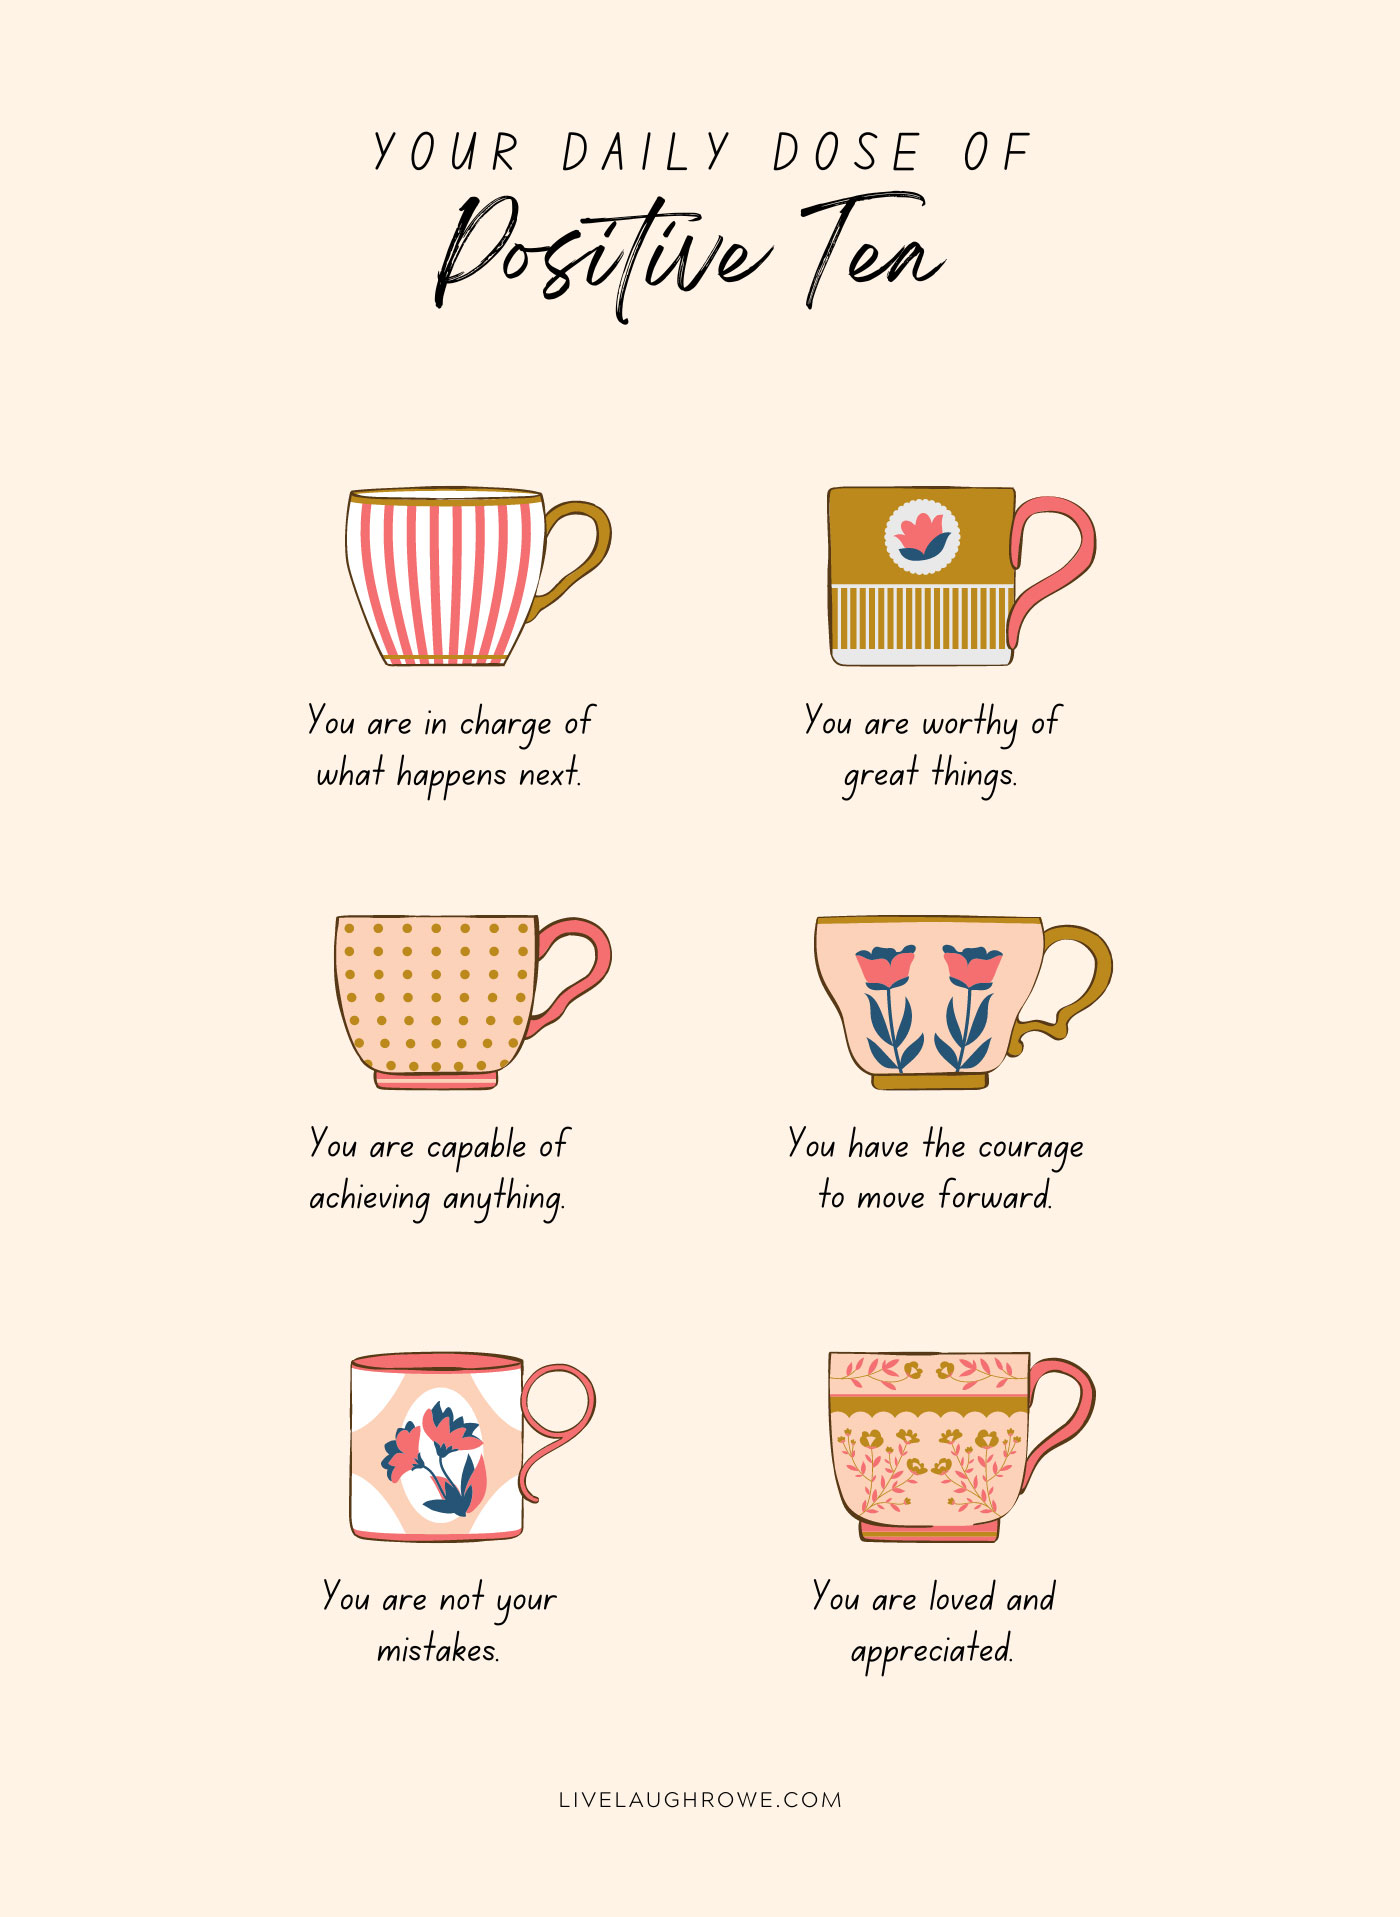 Daily Dose of Positive Tea Infographic